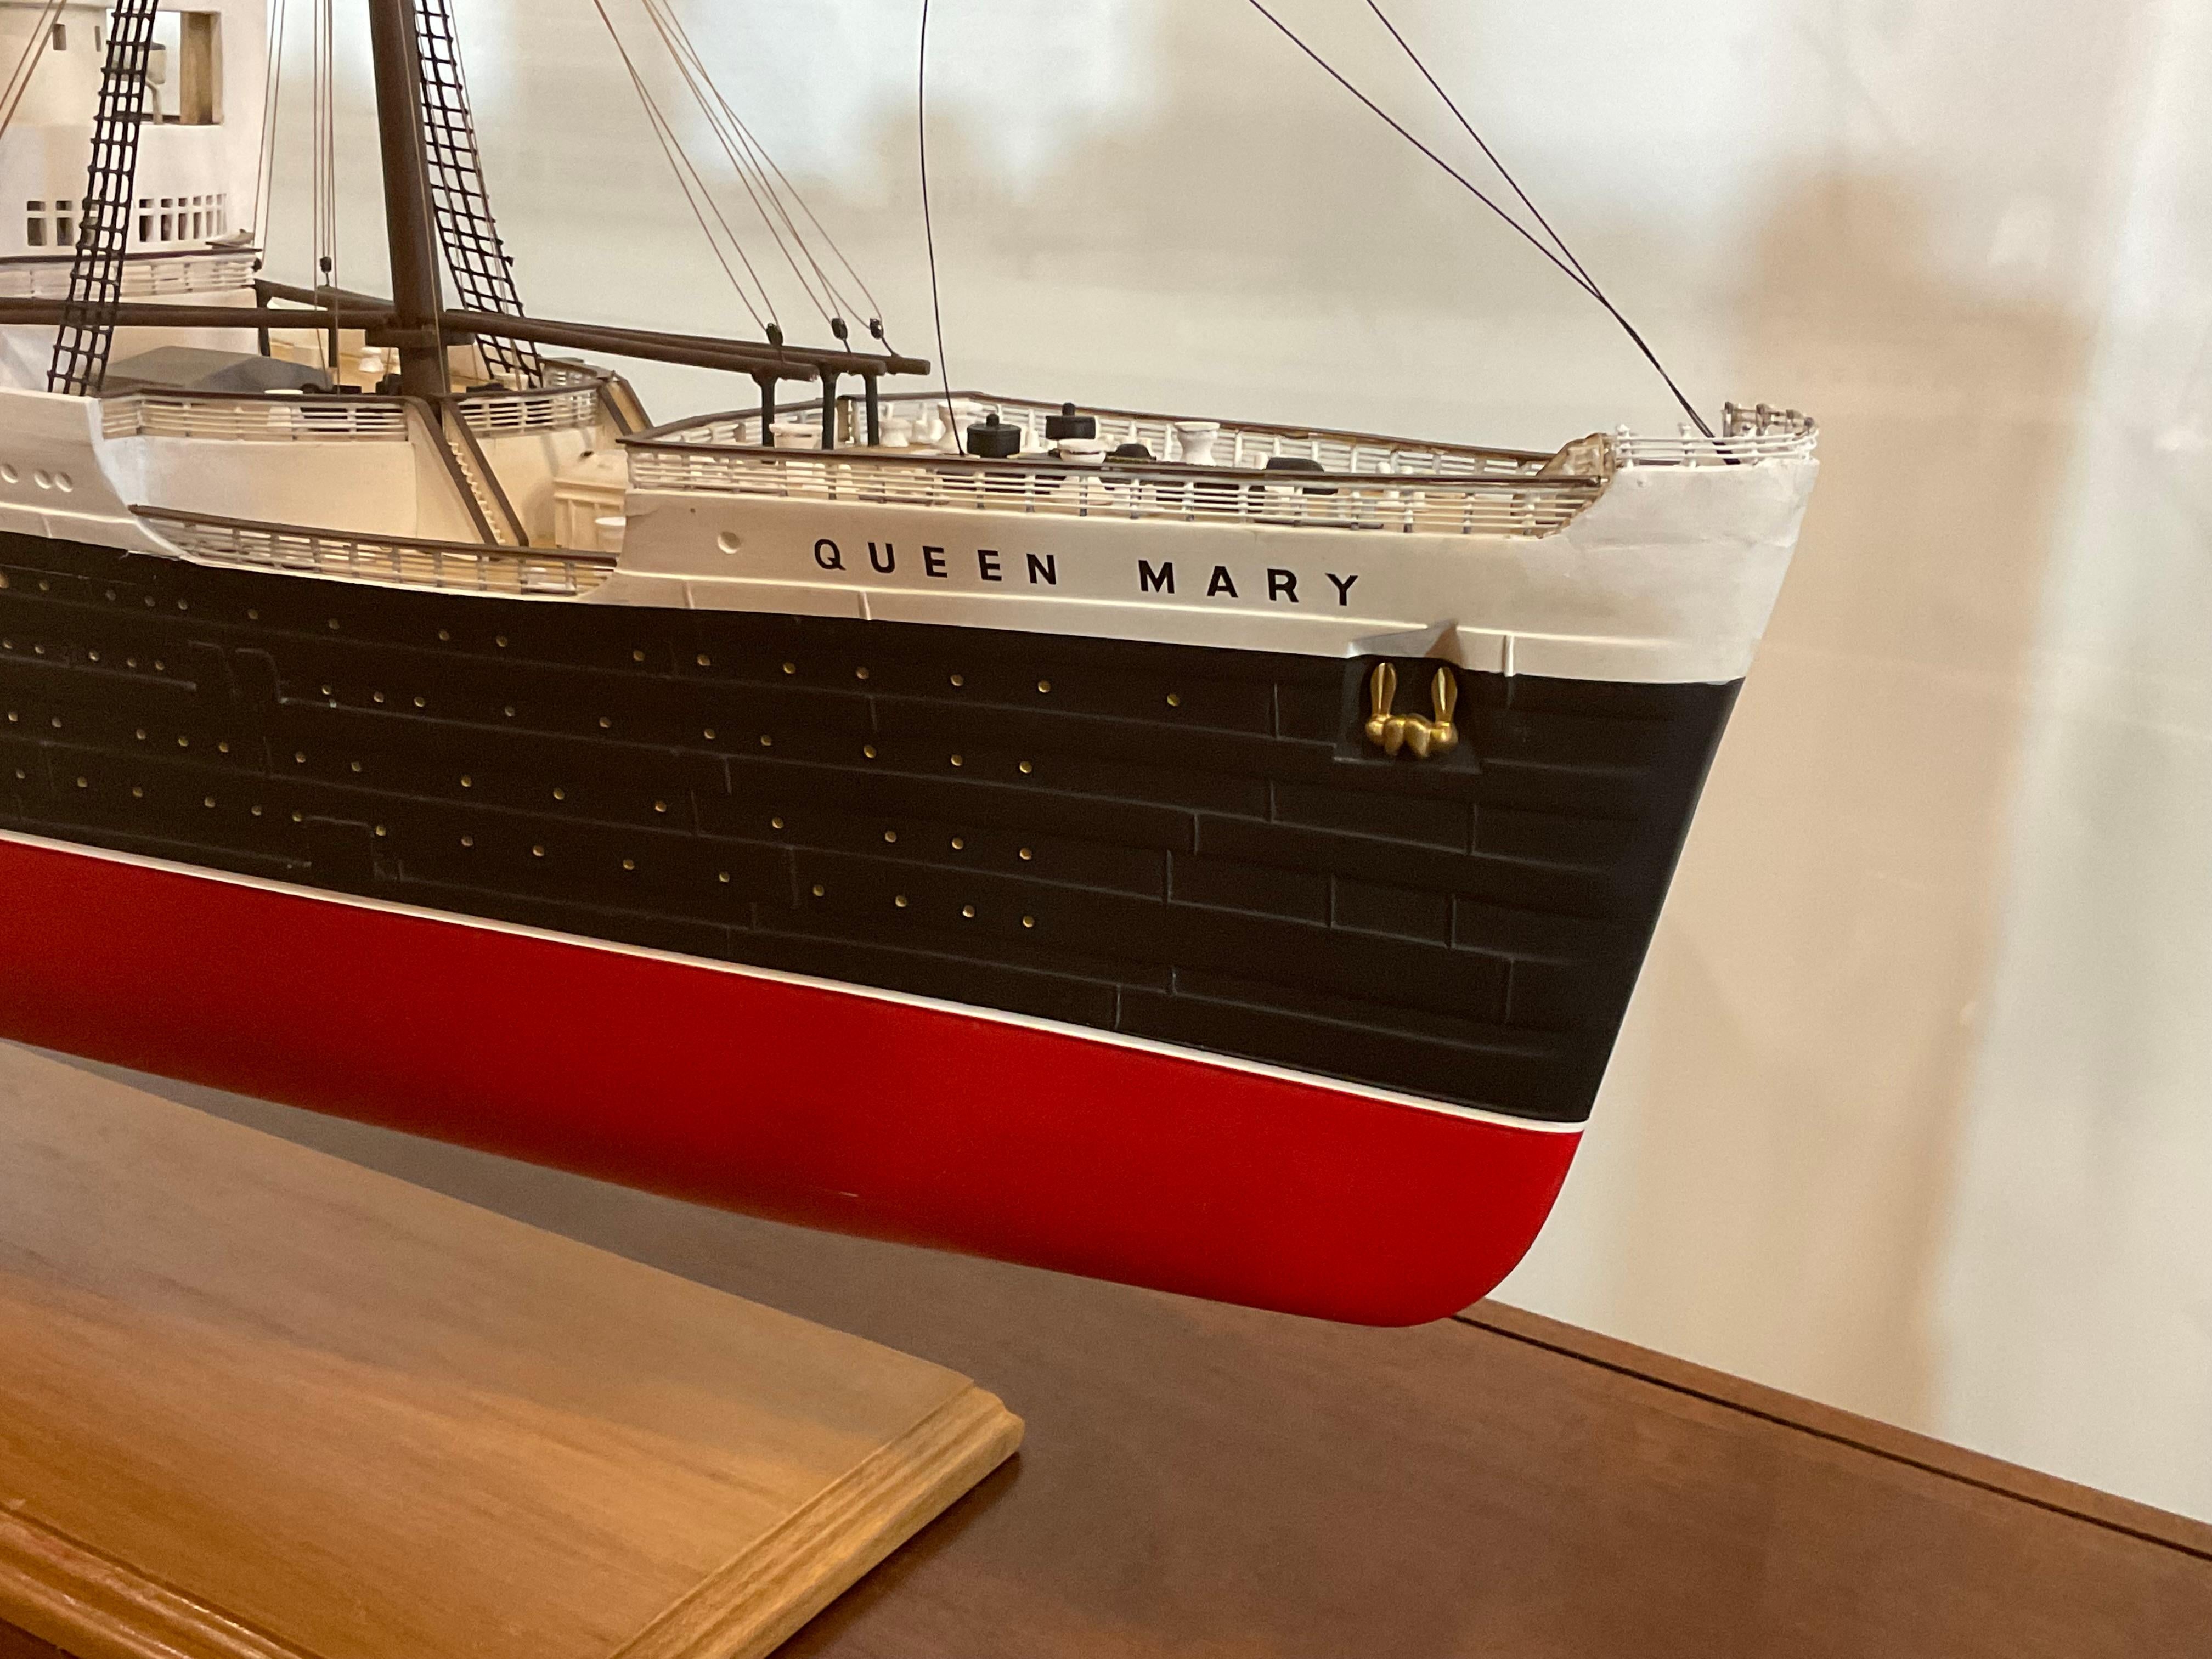 North American Ocean Liner Queen Mary Ship Model For Sale